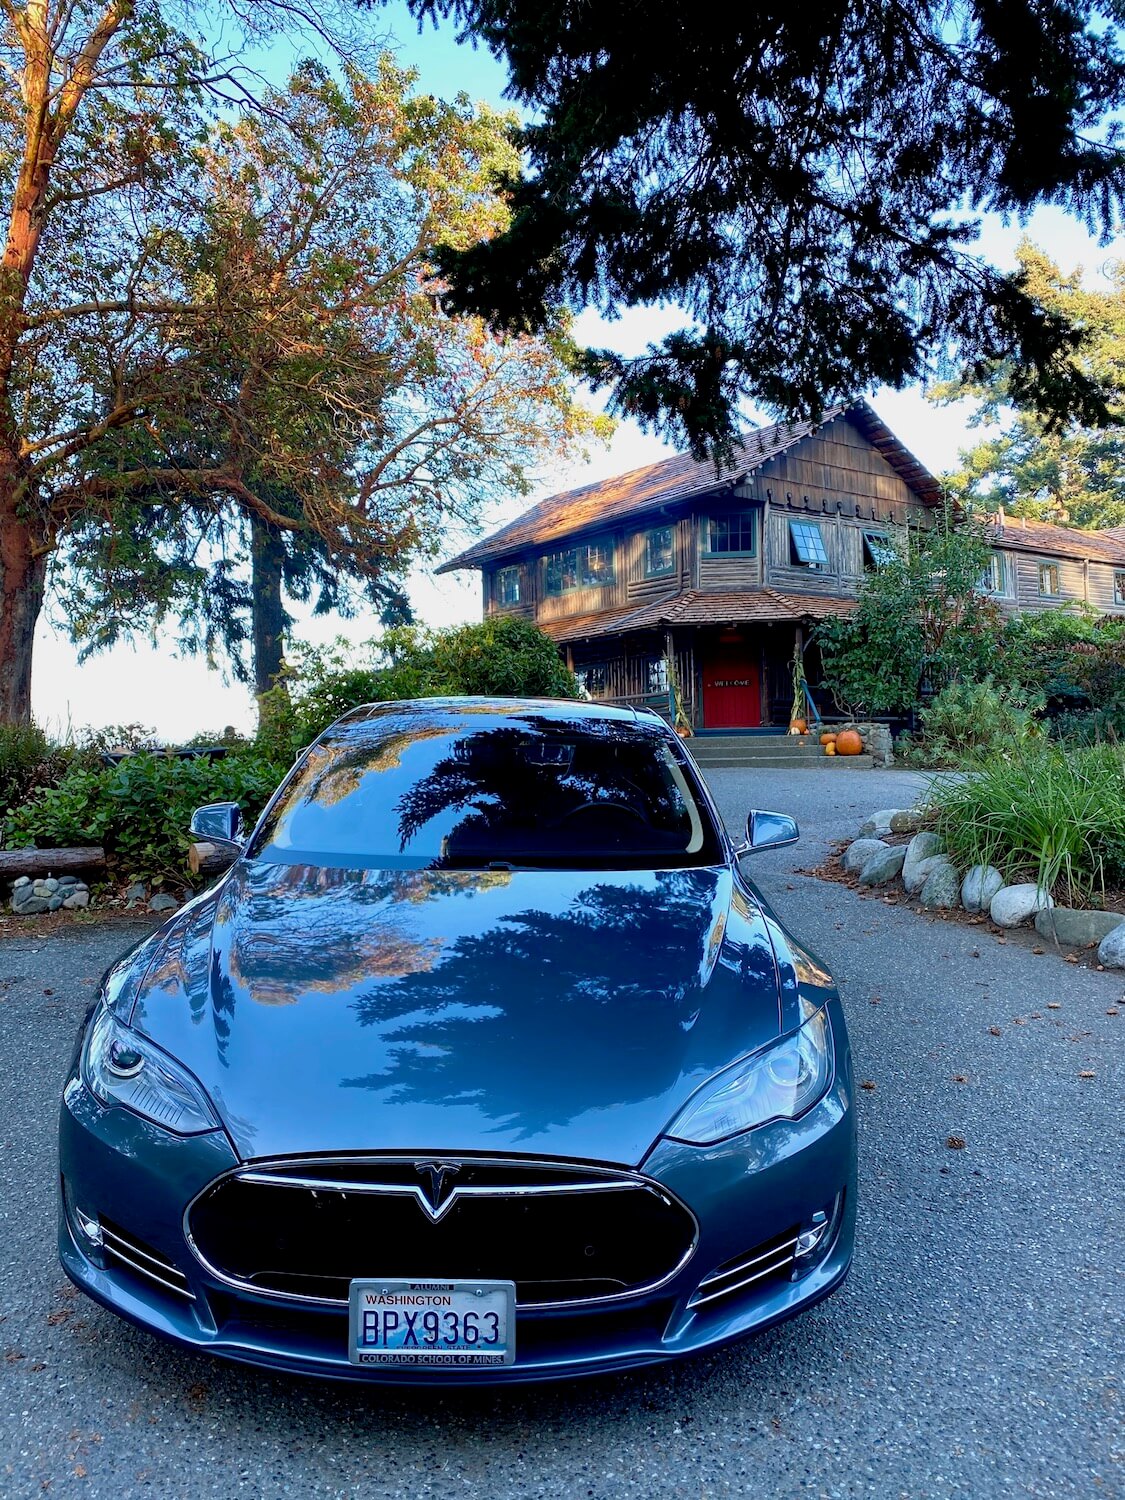 A Tesla electric vehicle is parked near the entrance to Captain Whidbey Inn on Whidbey Island in the middle of the Puget Sound.  The red door leading inside the hotel is bright against the log cabin style of the lodge.  